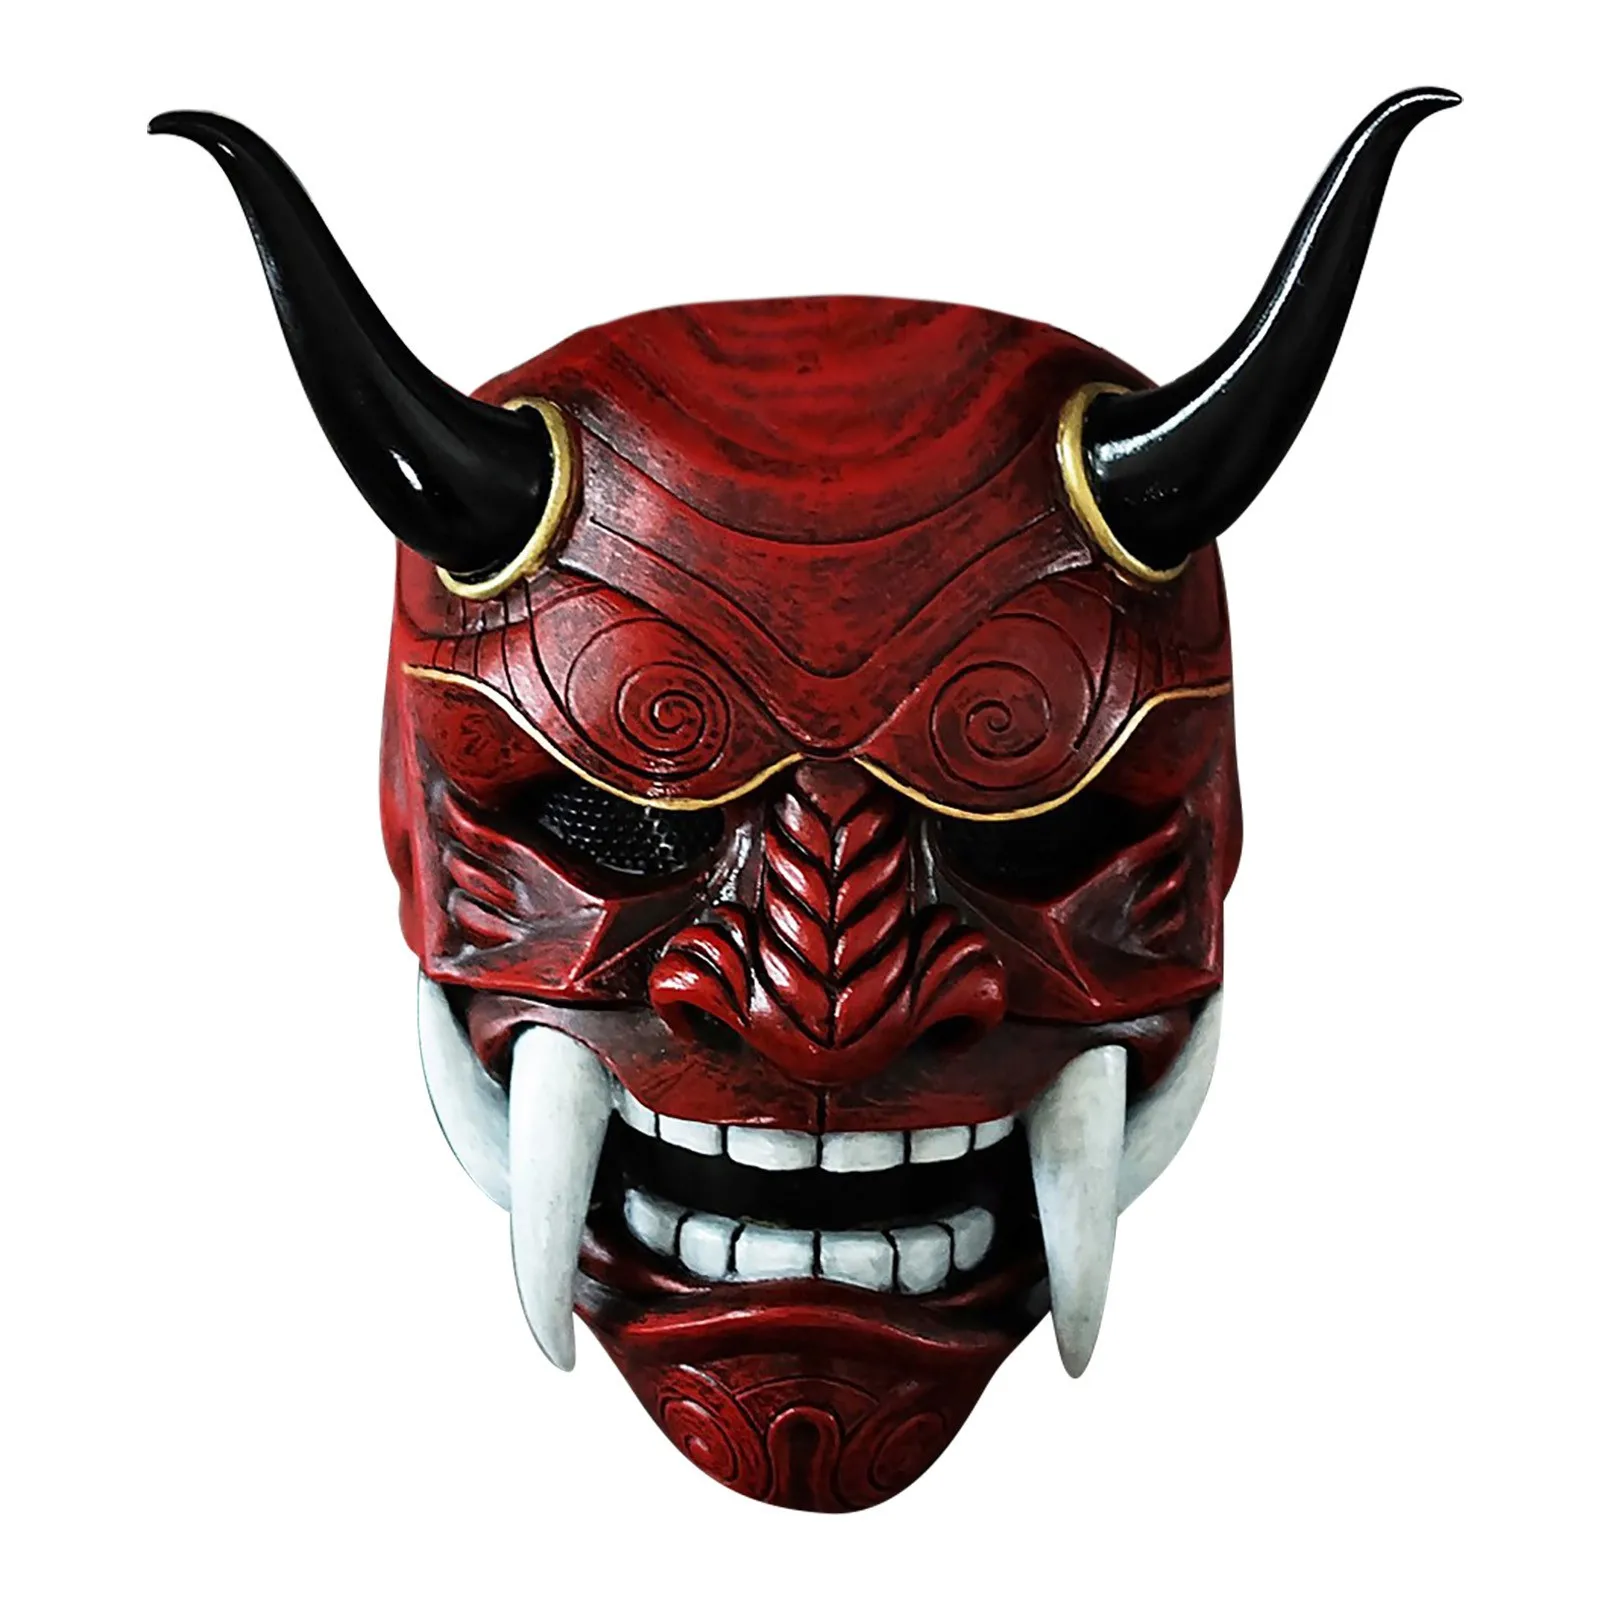 

Japanese Assassin Mask Halloween Creepy Face Mask Latex Cosplay Party Props Funny Mask Monster Mask Masquerade Party Mask